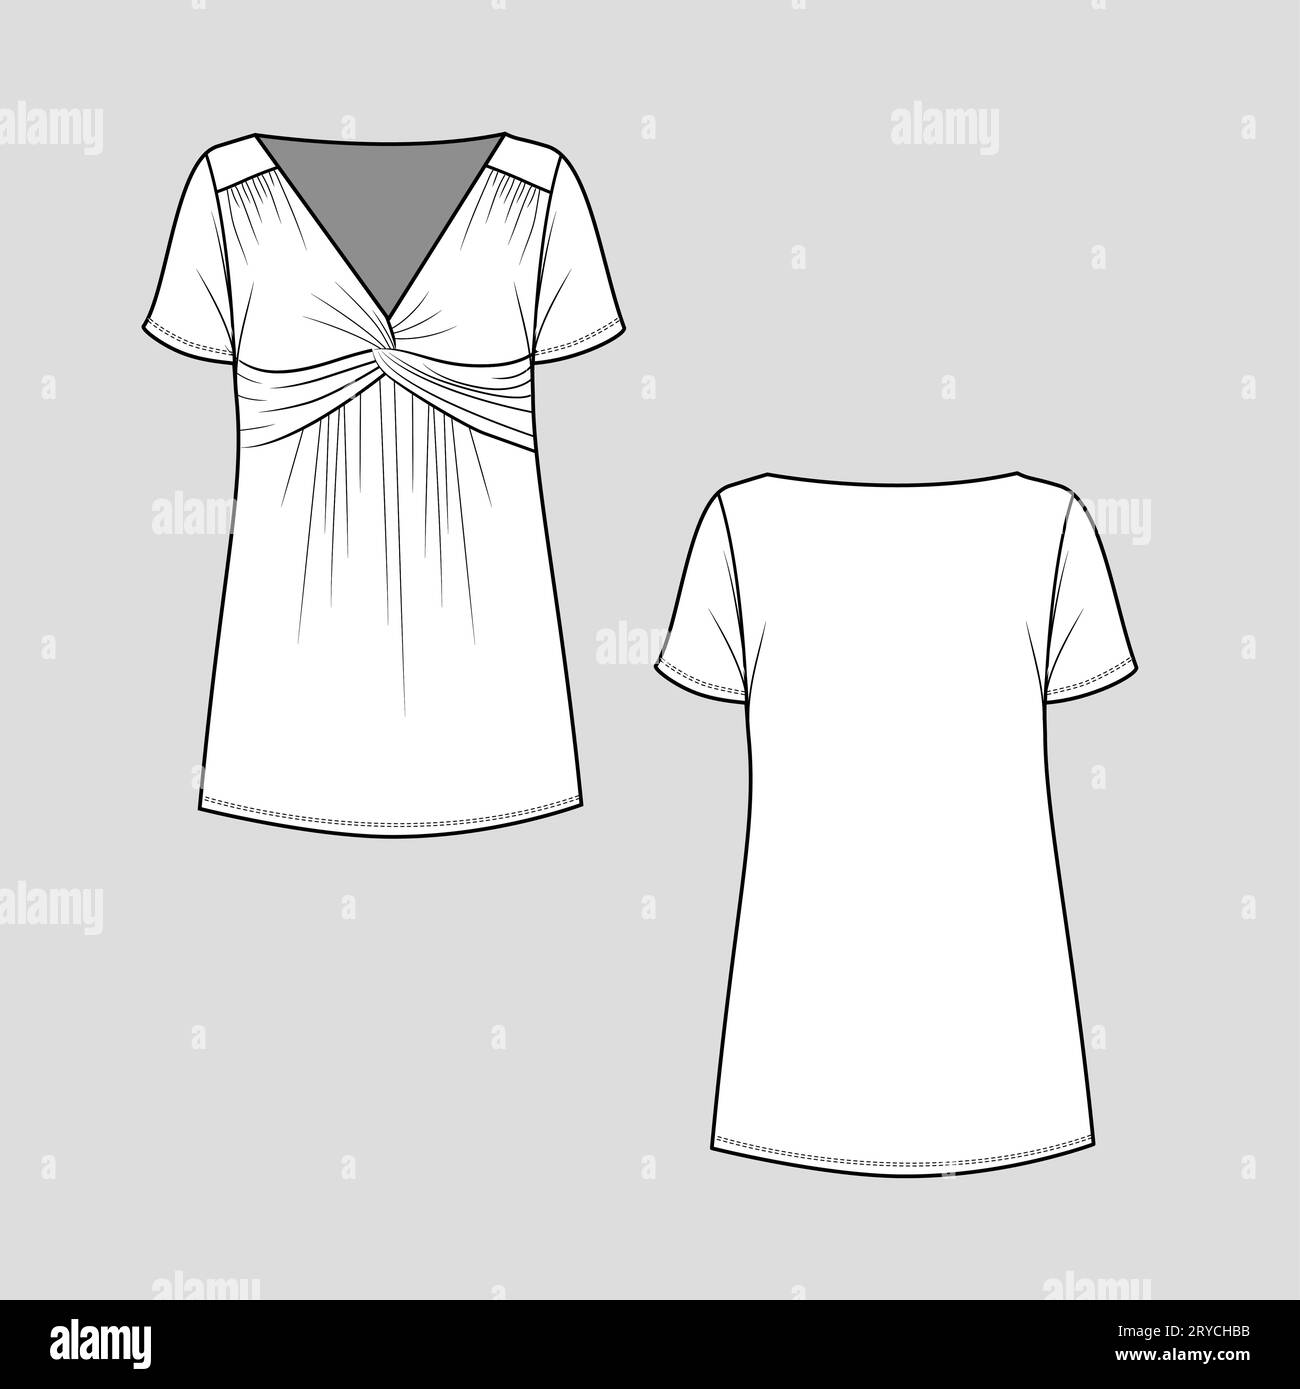 Women tunic top Front Twist knot gathering v neck short sleeve t shirt blouse top fashion flat sketch technical drawing template design vector Stock Vector